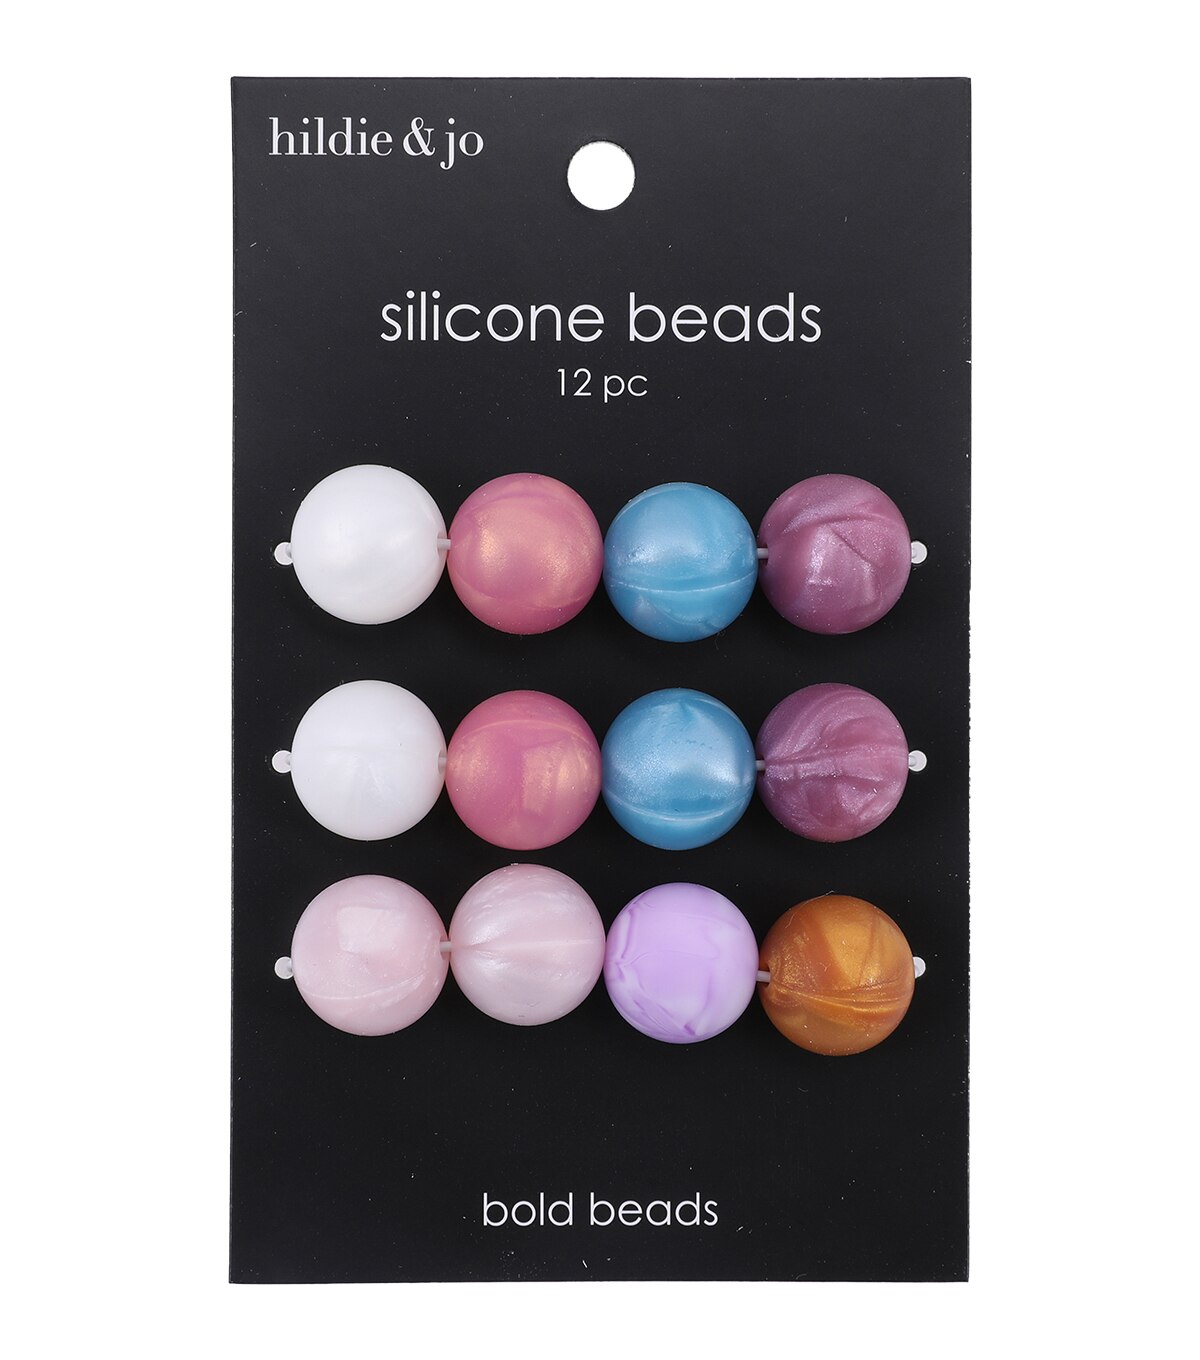 Silicone beads - Get the best prices - Buy today